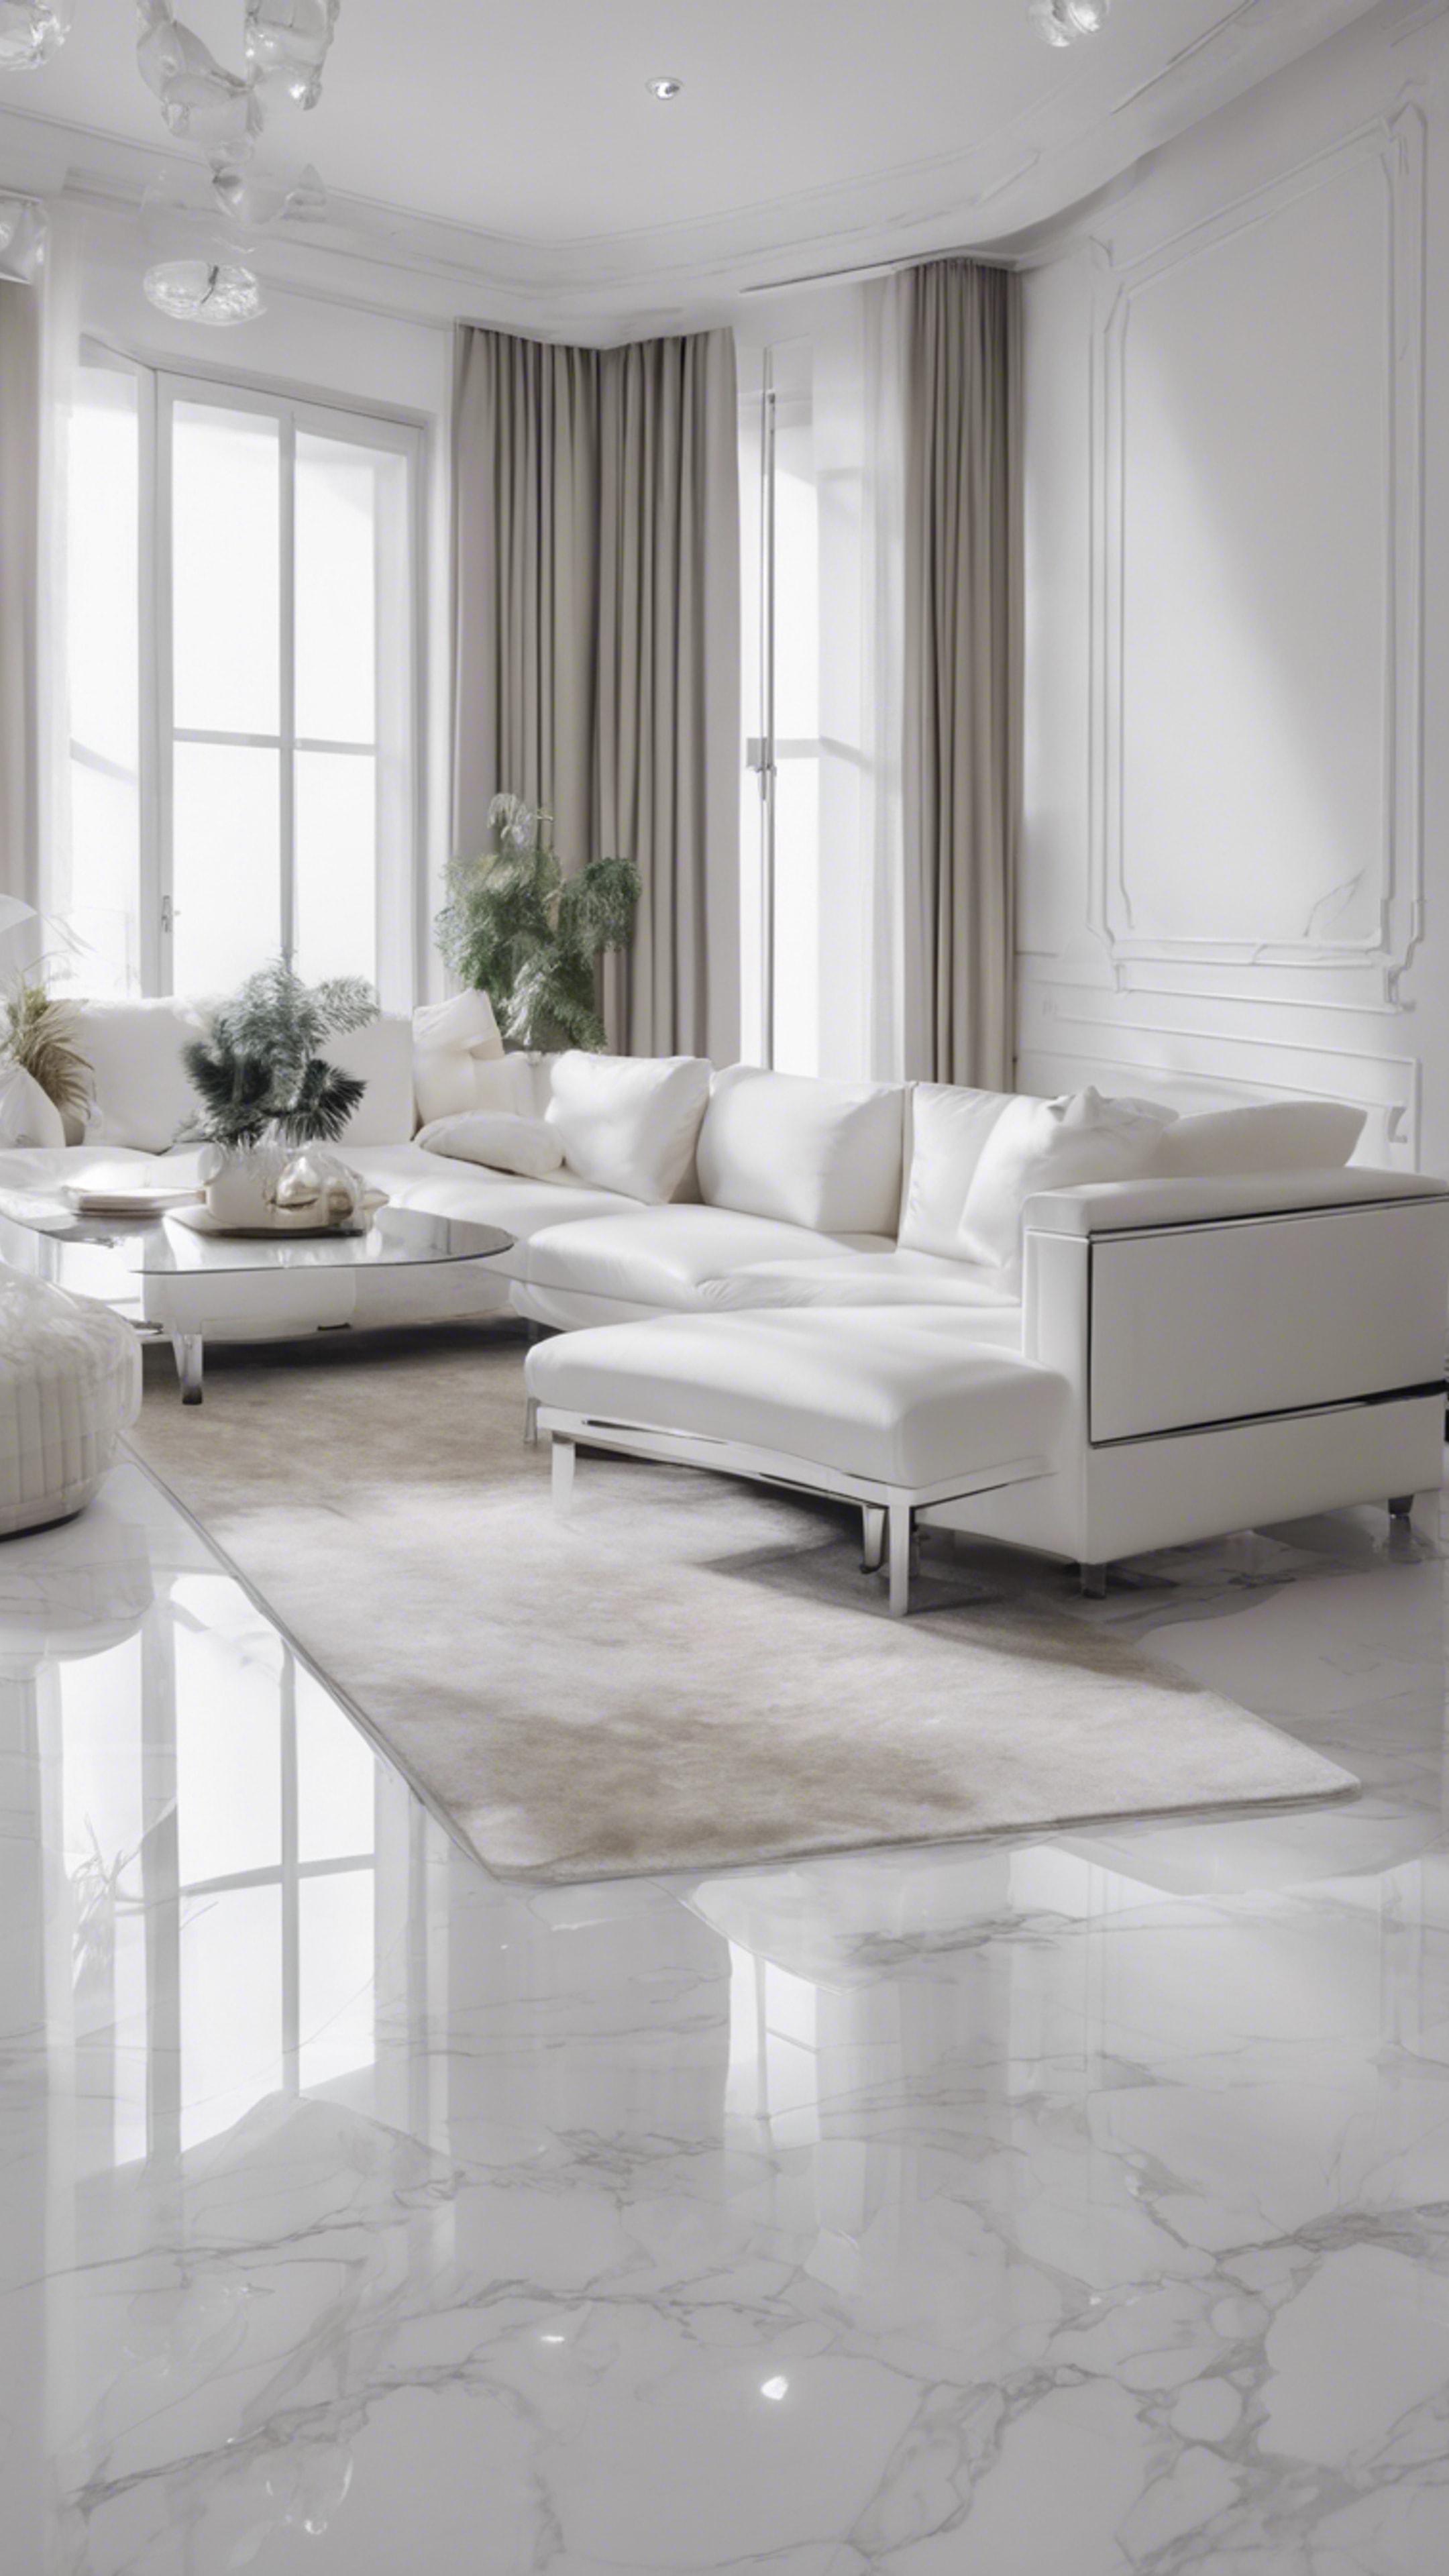 An ultra-modern minimalist interior design of a living room, with cool white walls, silver furniture and white marble floors. Papel de parede[0b803decb0d241b99c2a]